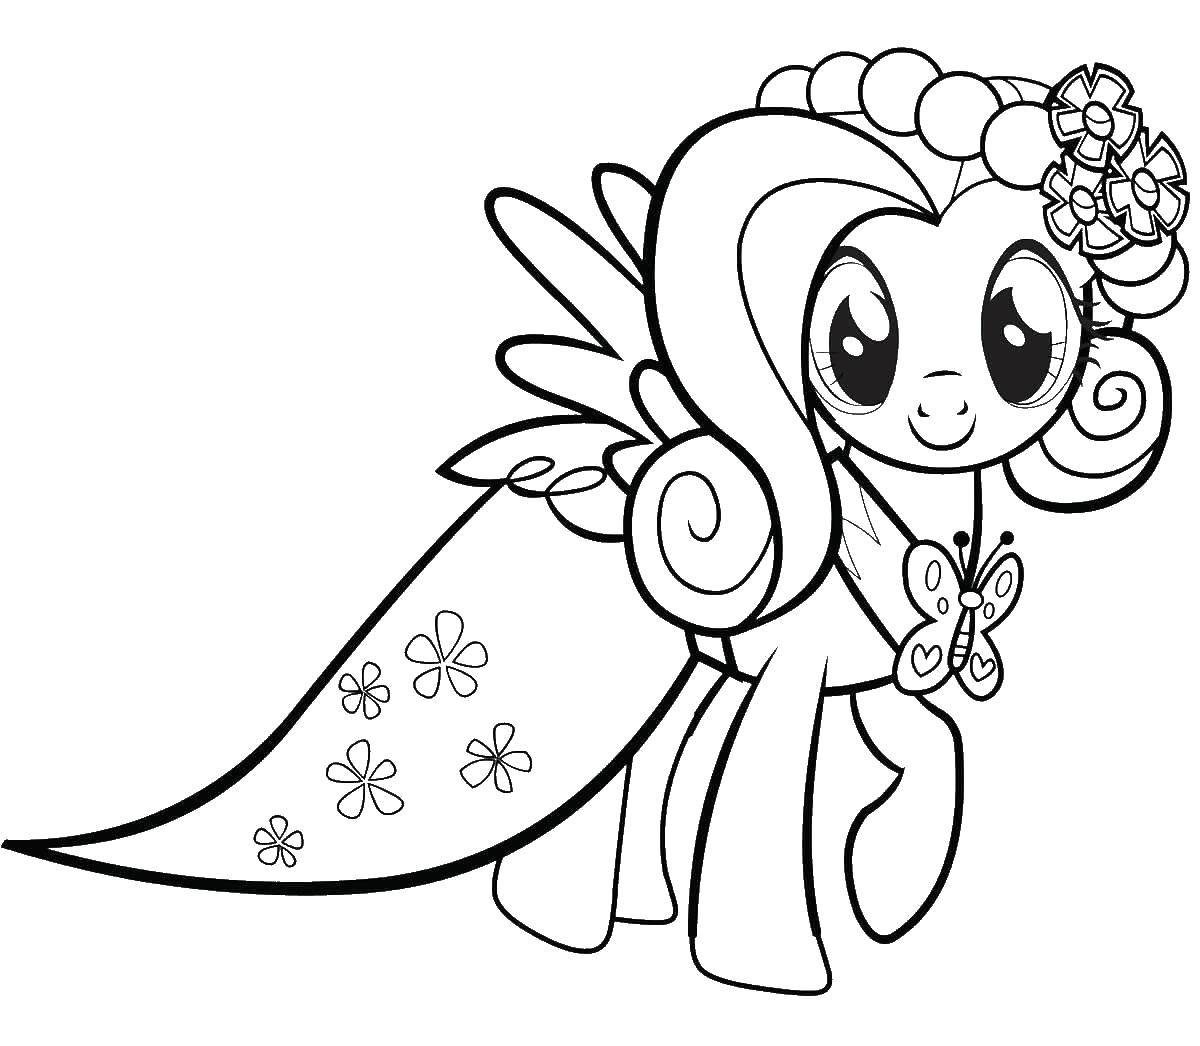 Coloring My little pony. Category Ponies. Tags:  Pony, My little pony.